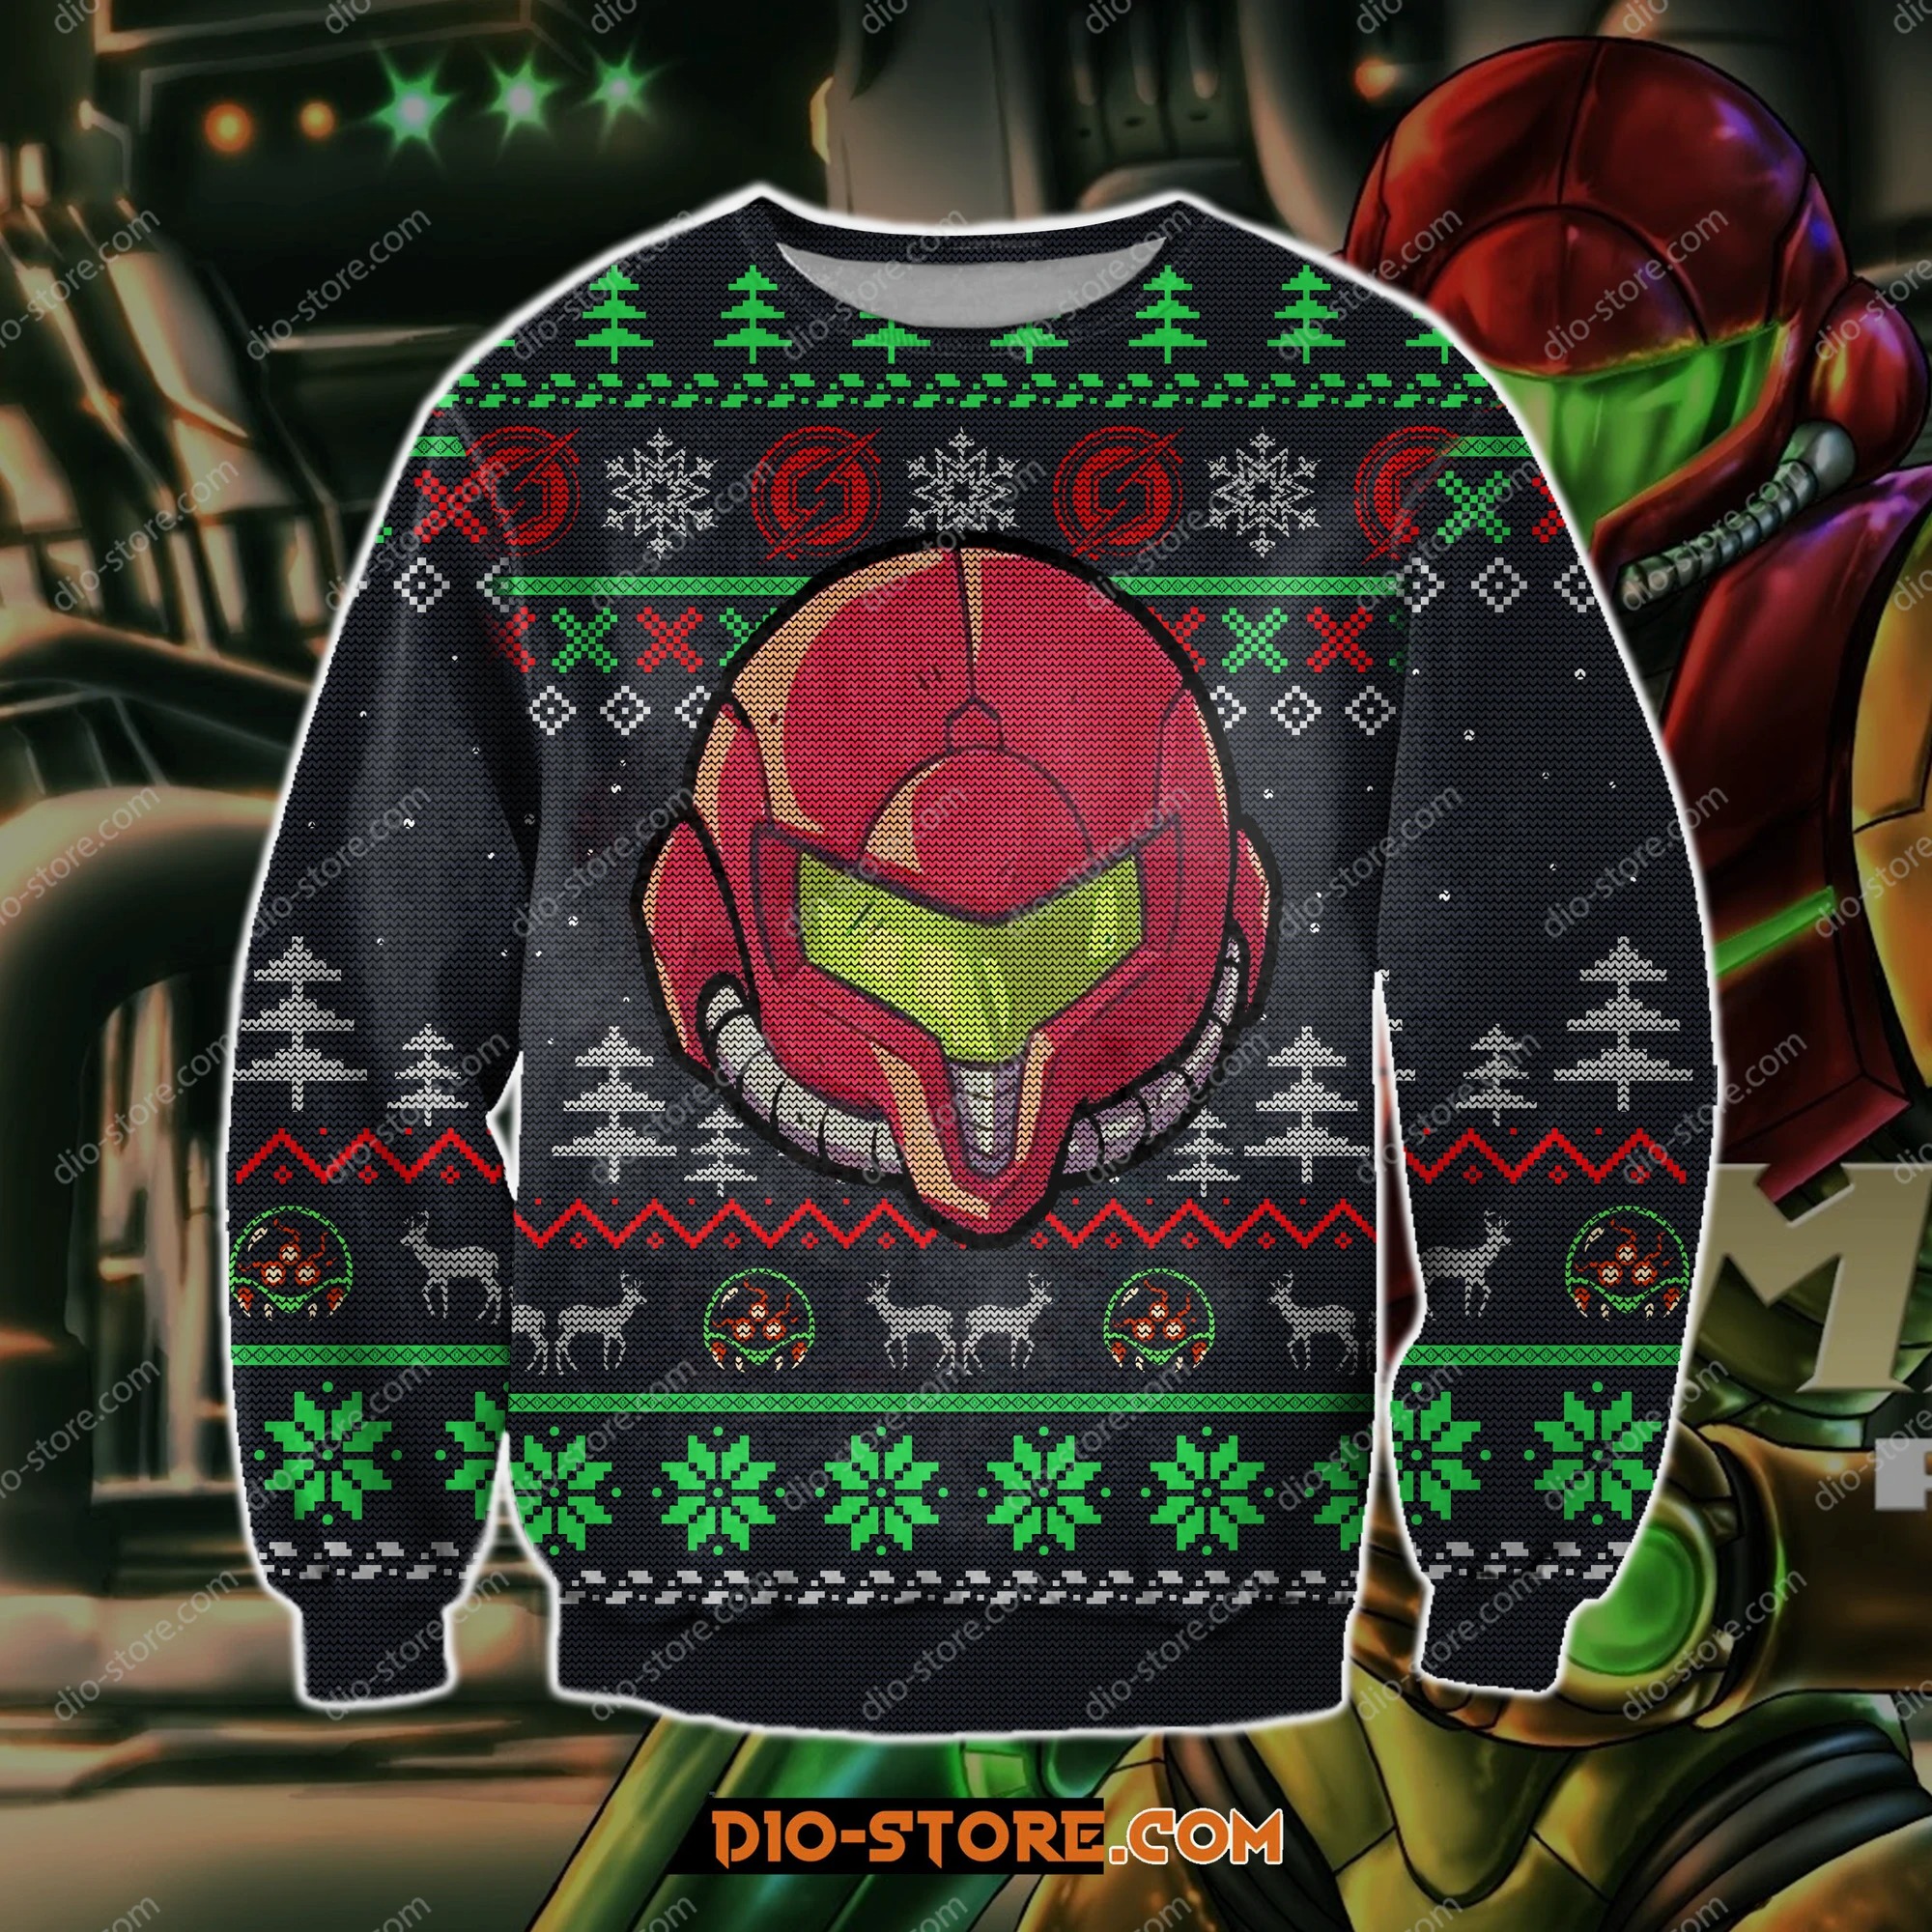 Metroid game knitting pattern 3d print ugly christmas sweater